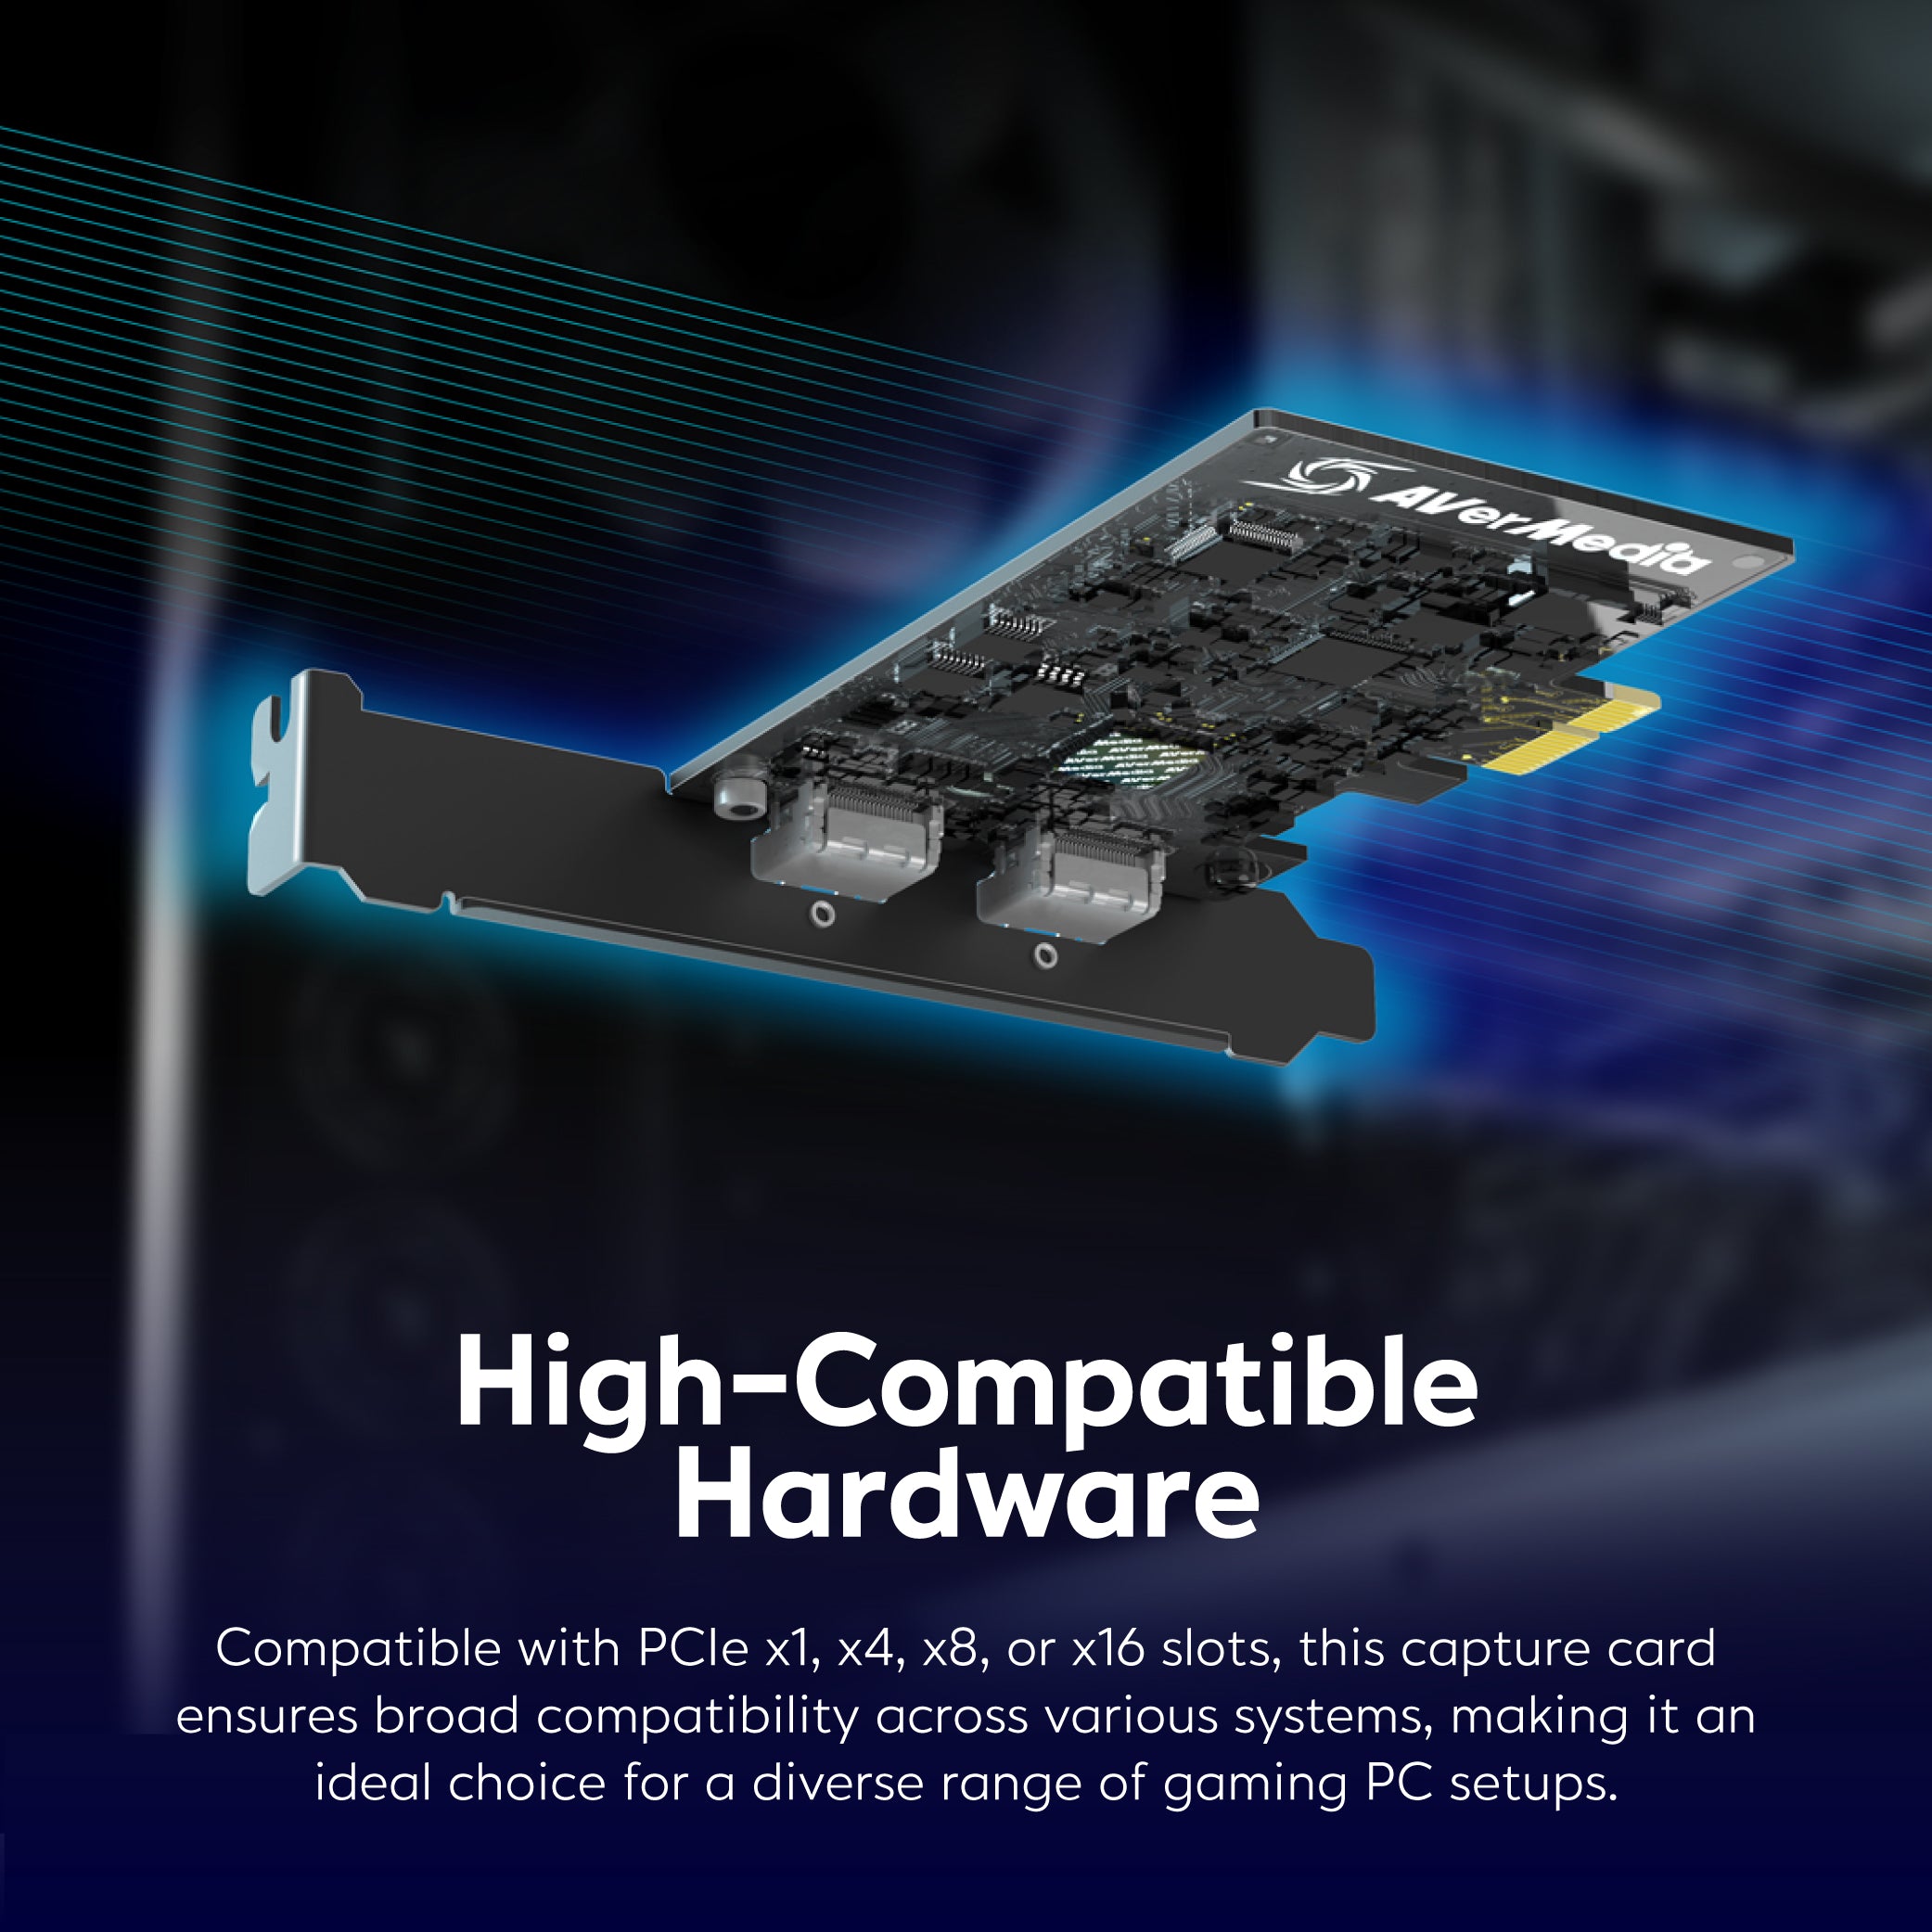 GC571 1080p120 High Frame Rate PCIe Capture Card for Gaming 